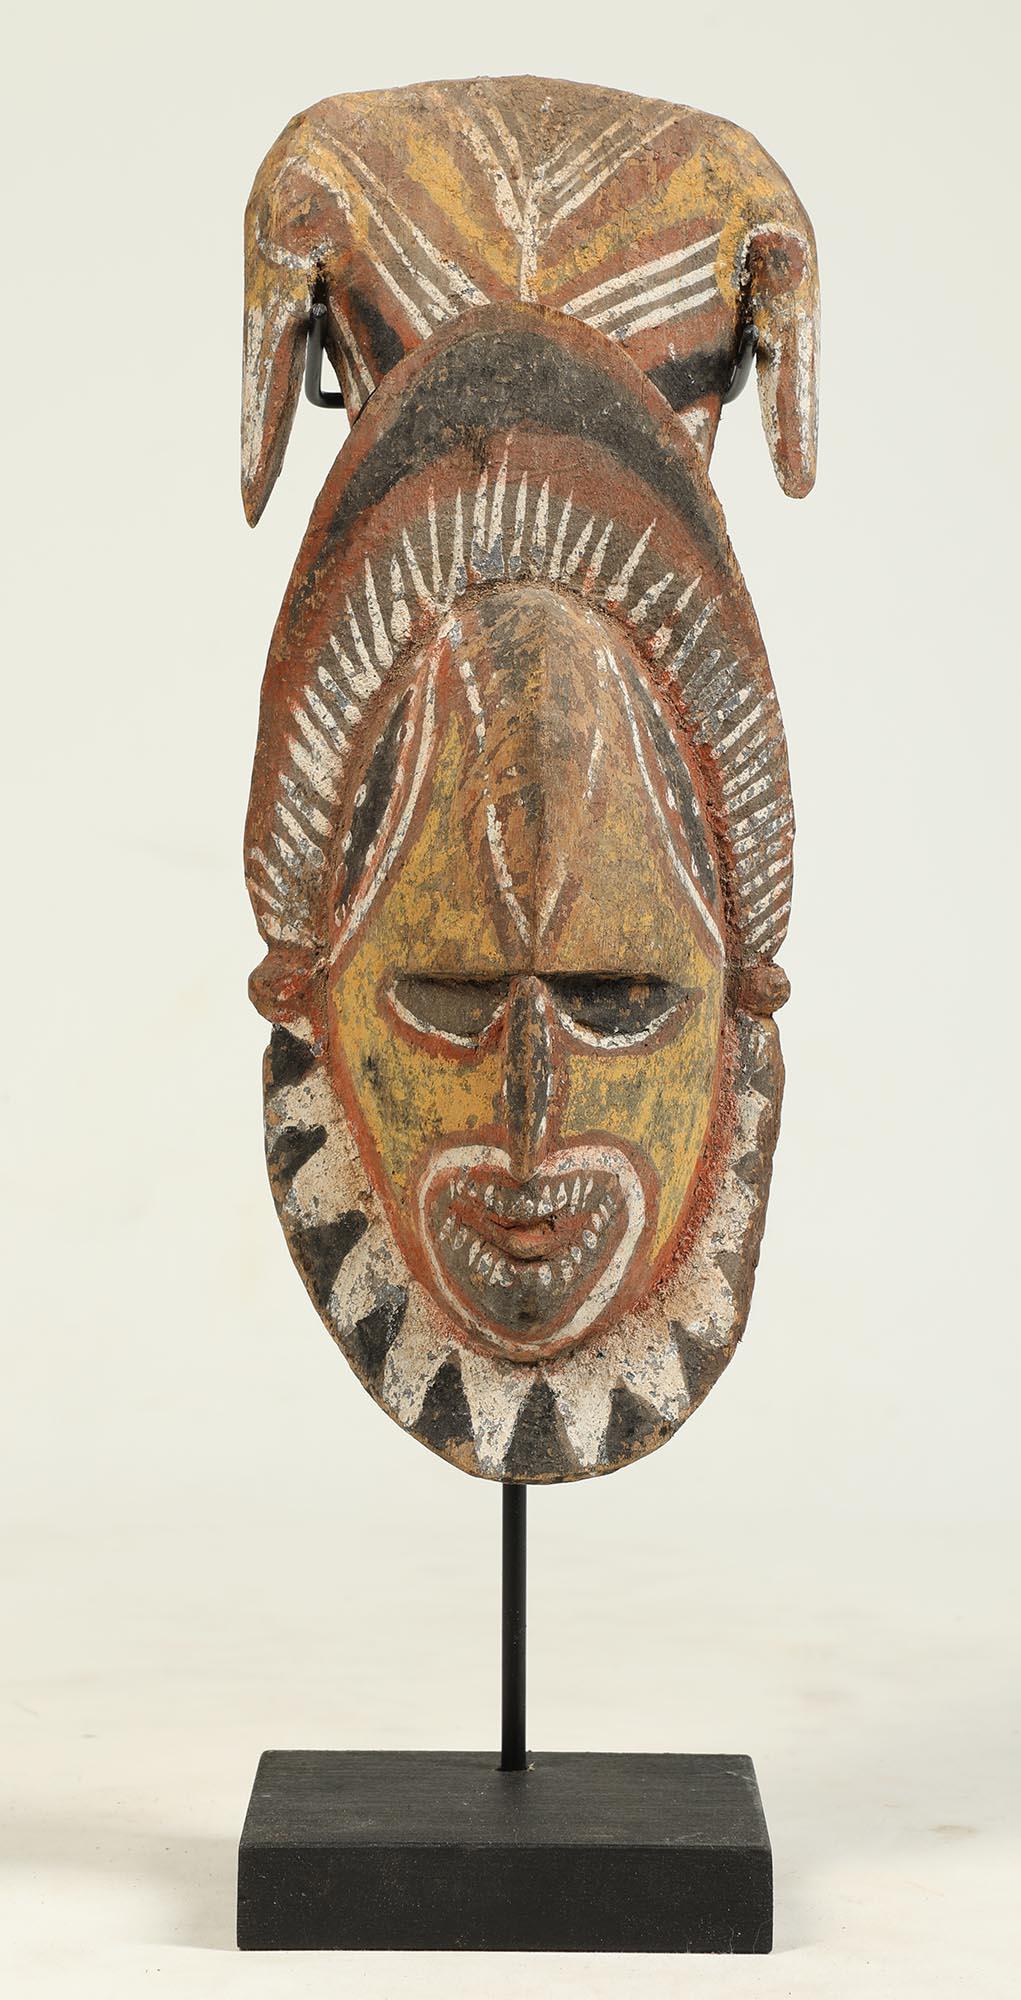 From Papua New Guinea an early painted Maprik carved wood head sculpture or mask, intense expression showing teeth, and two opposing stylized birds on top. Mid 20th century. Faded polychrome pigments with yellow, white, black and red. 
Mask is 10